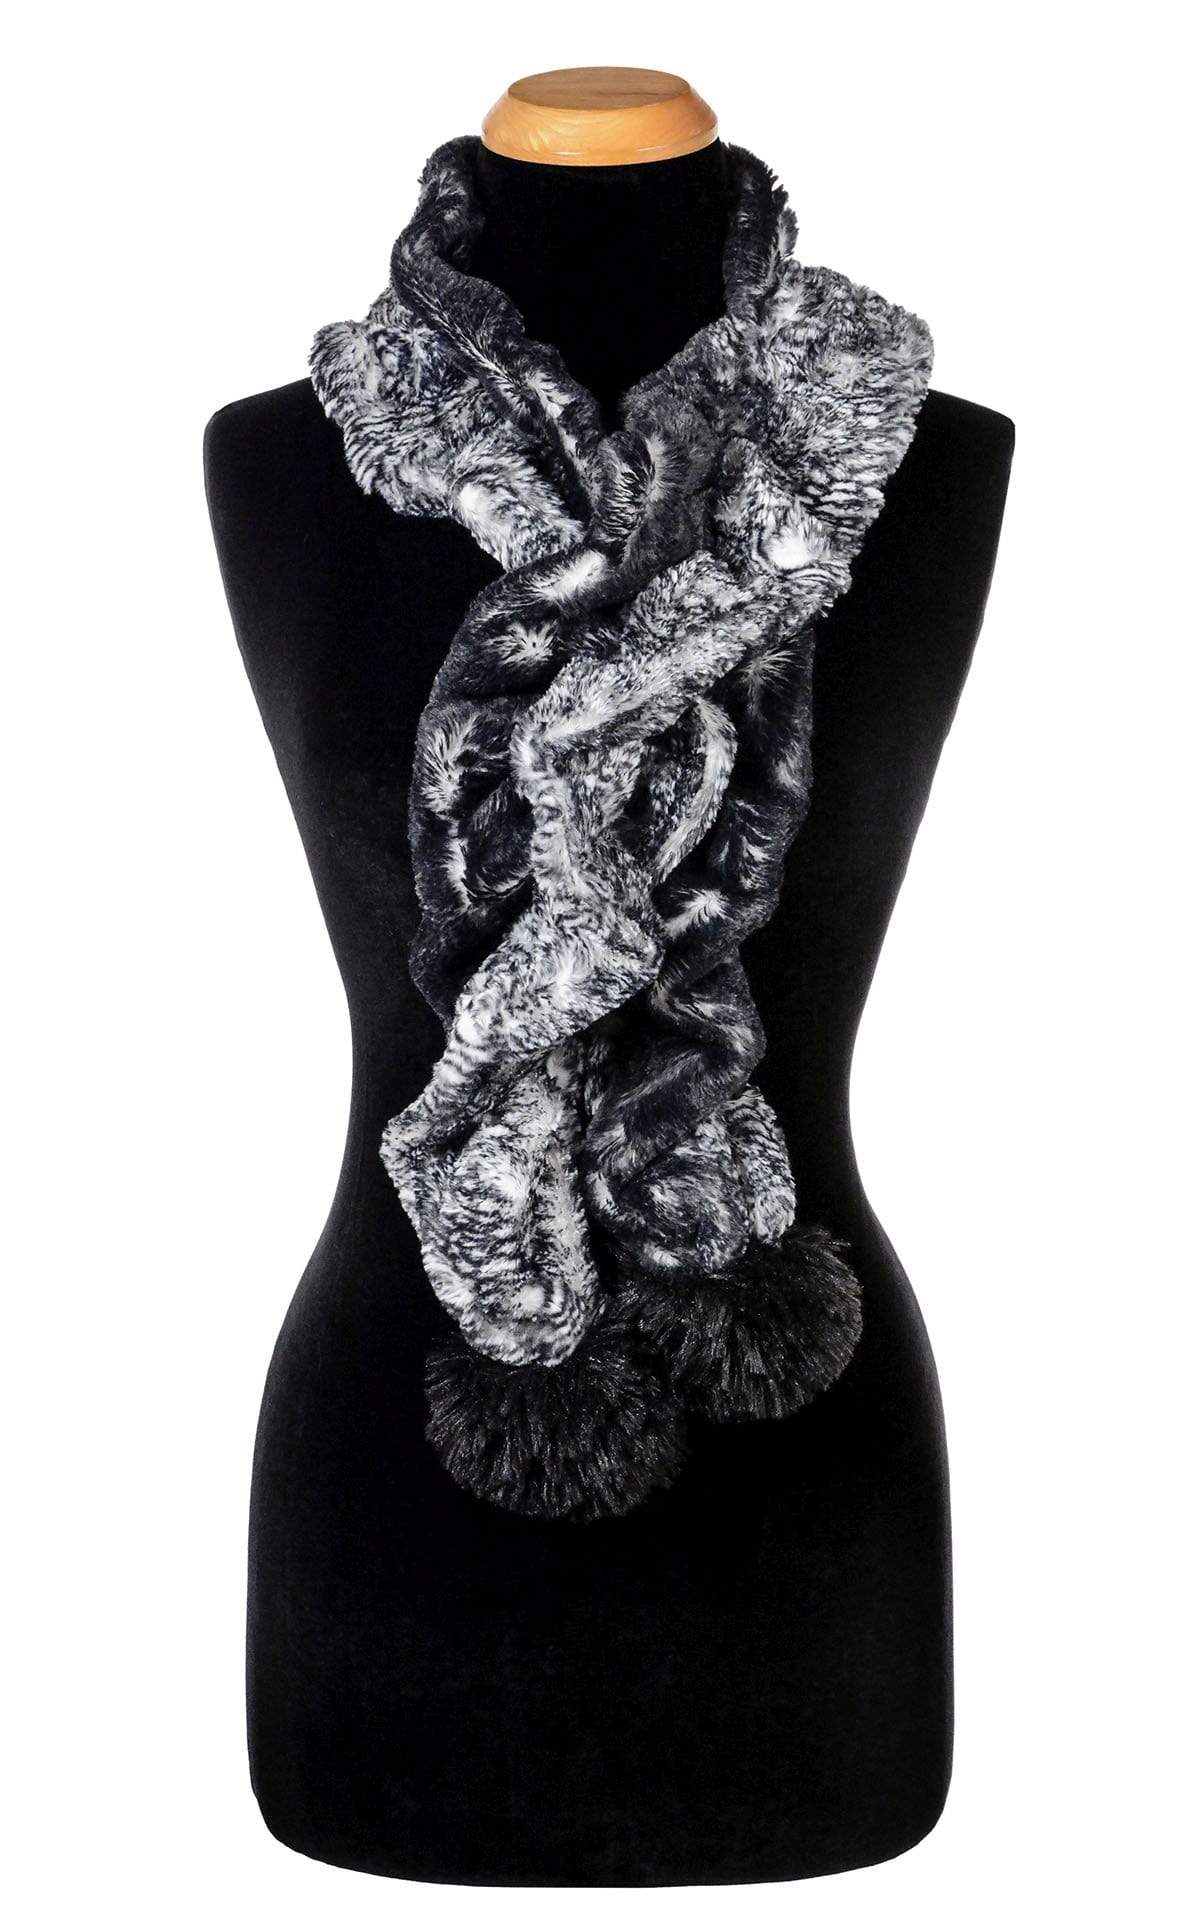 Women’s Scrunchy Scarf with pom poms| Black Mamba Snake Print in Black and Ivory | Handmade in Seattle WA | Pandemonium Millinery